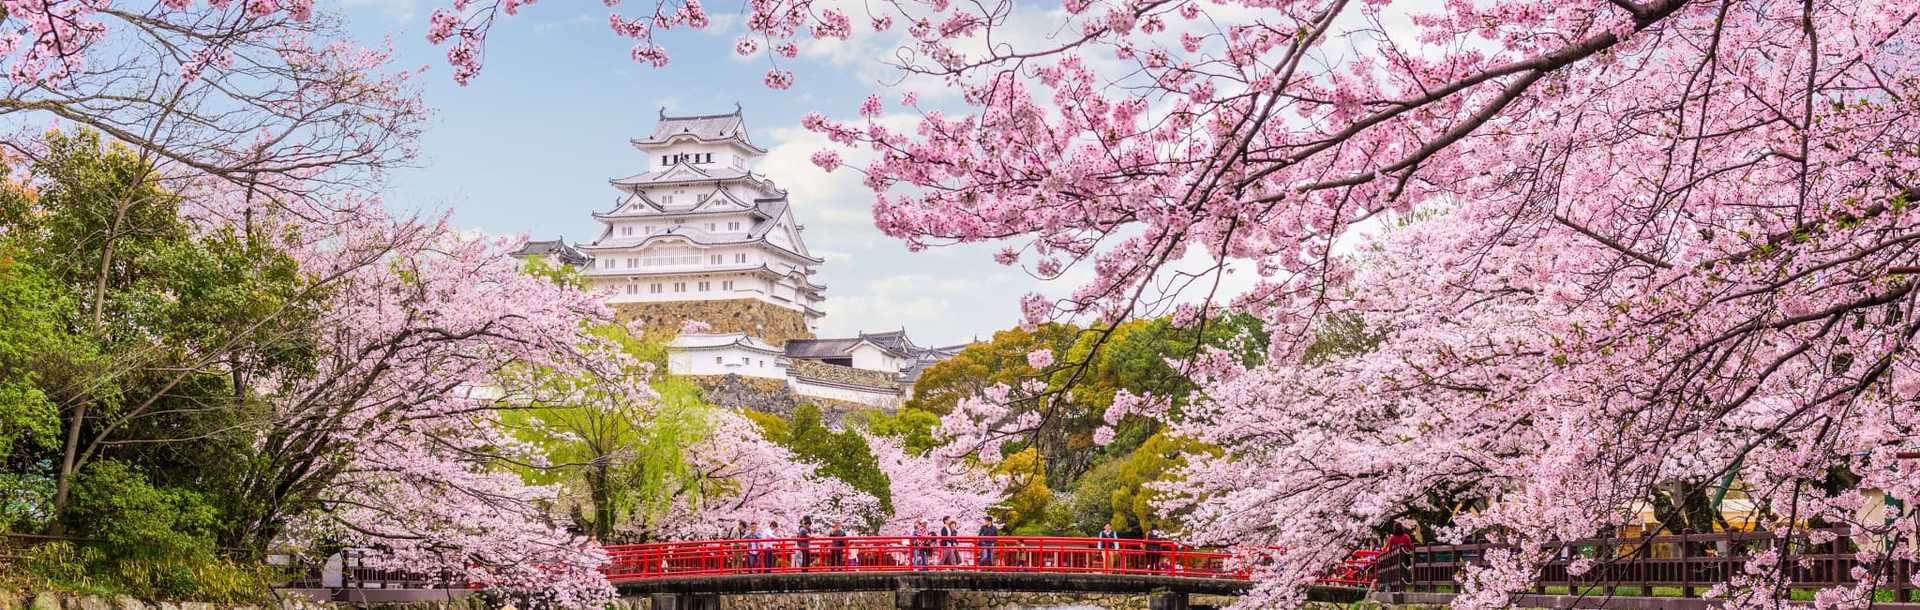 Japanese samurai castle with blooming cherry blossom trees.